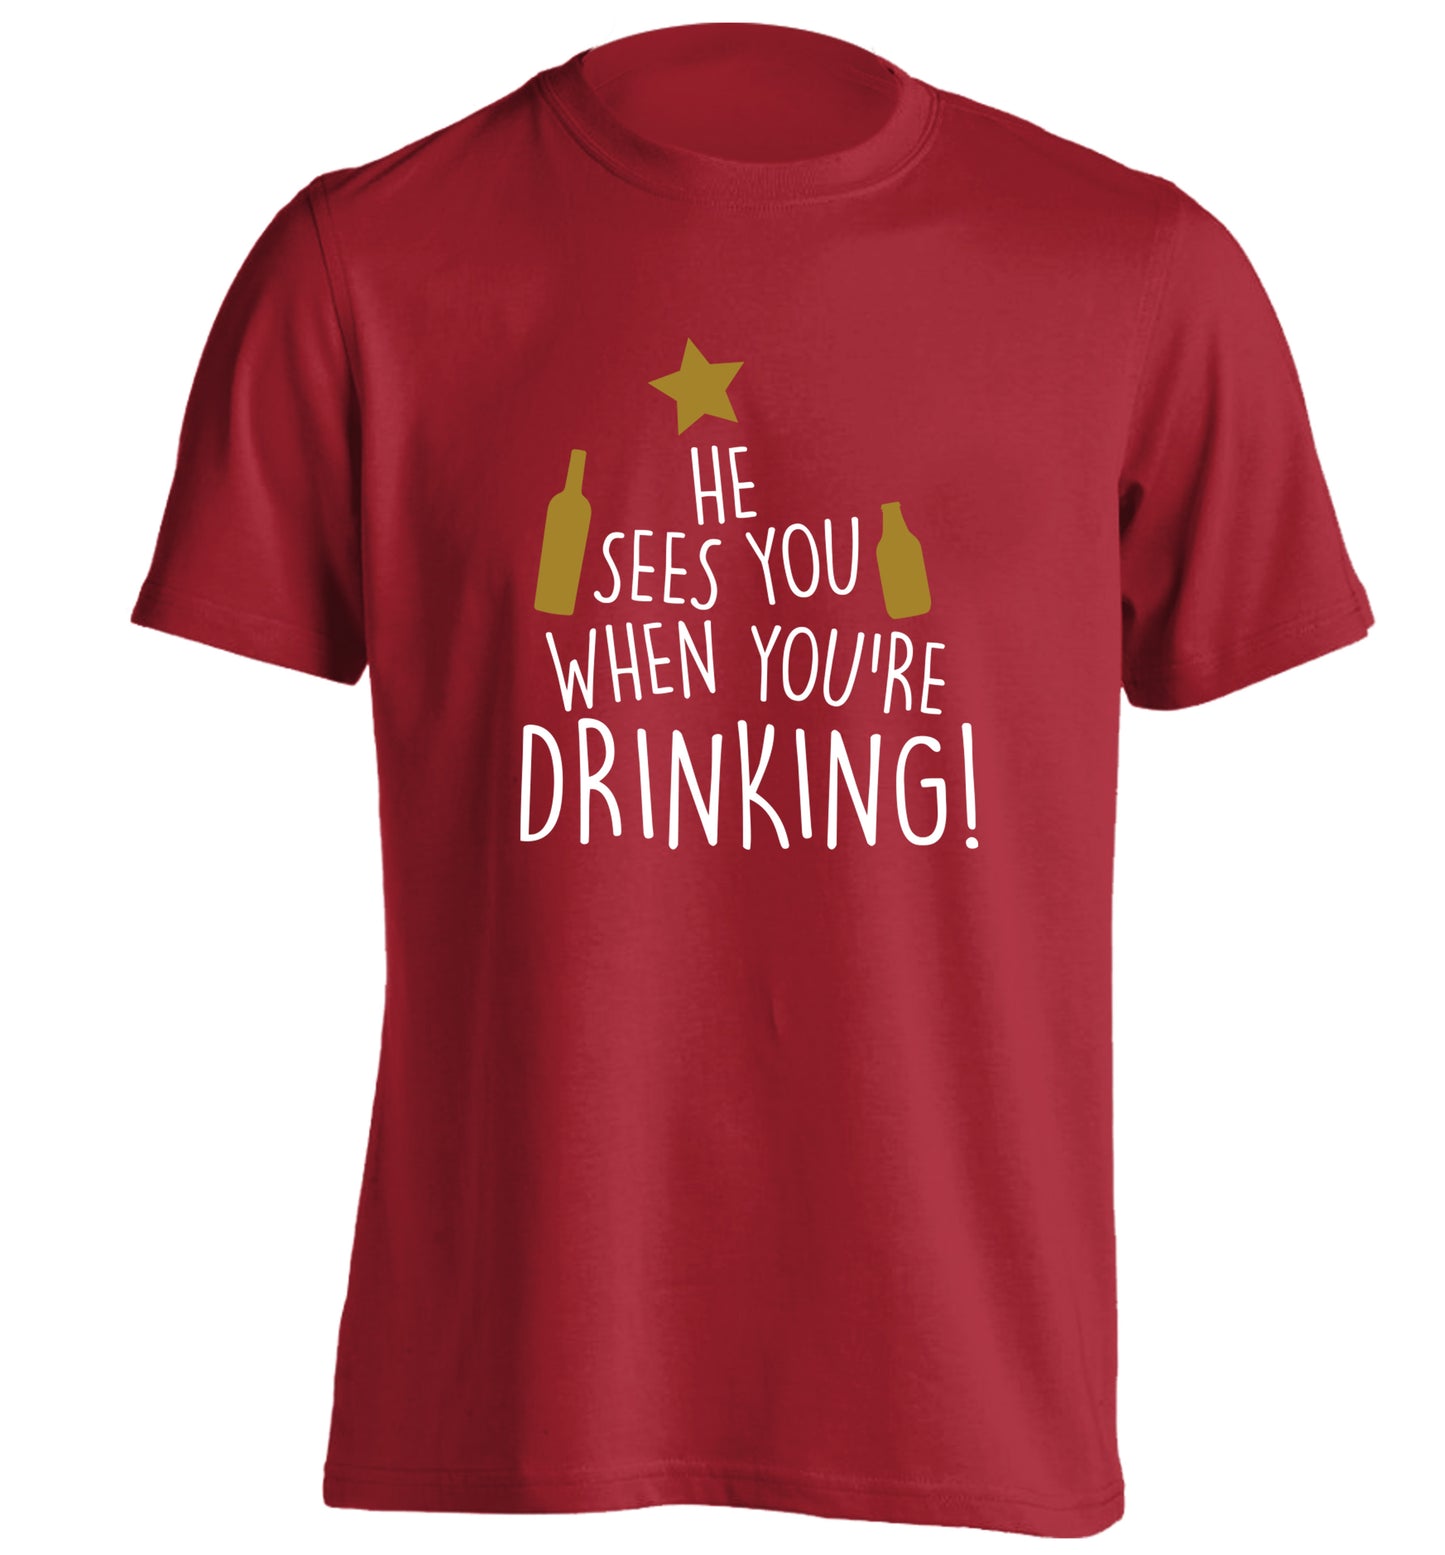 He sees you when you're drinking adults unisex red Tshirt 2XL